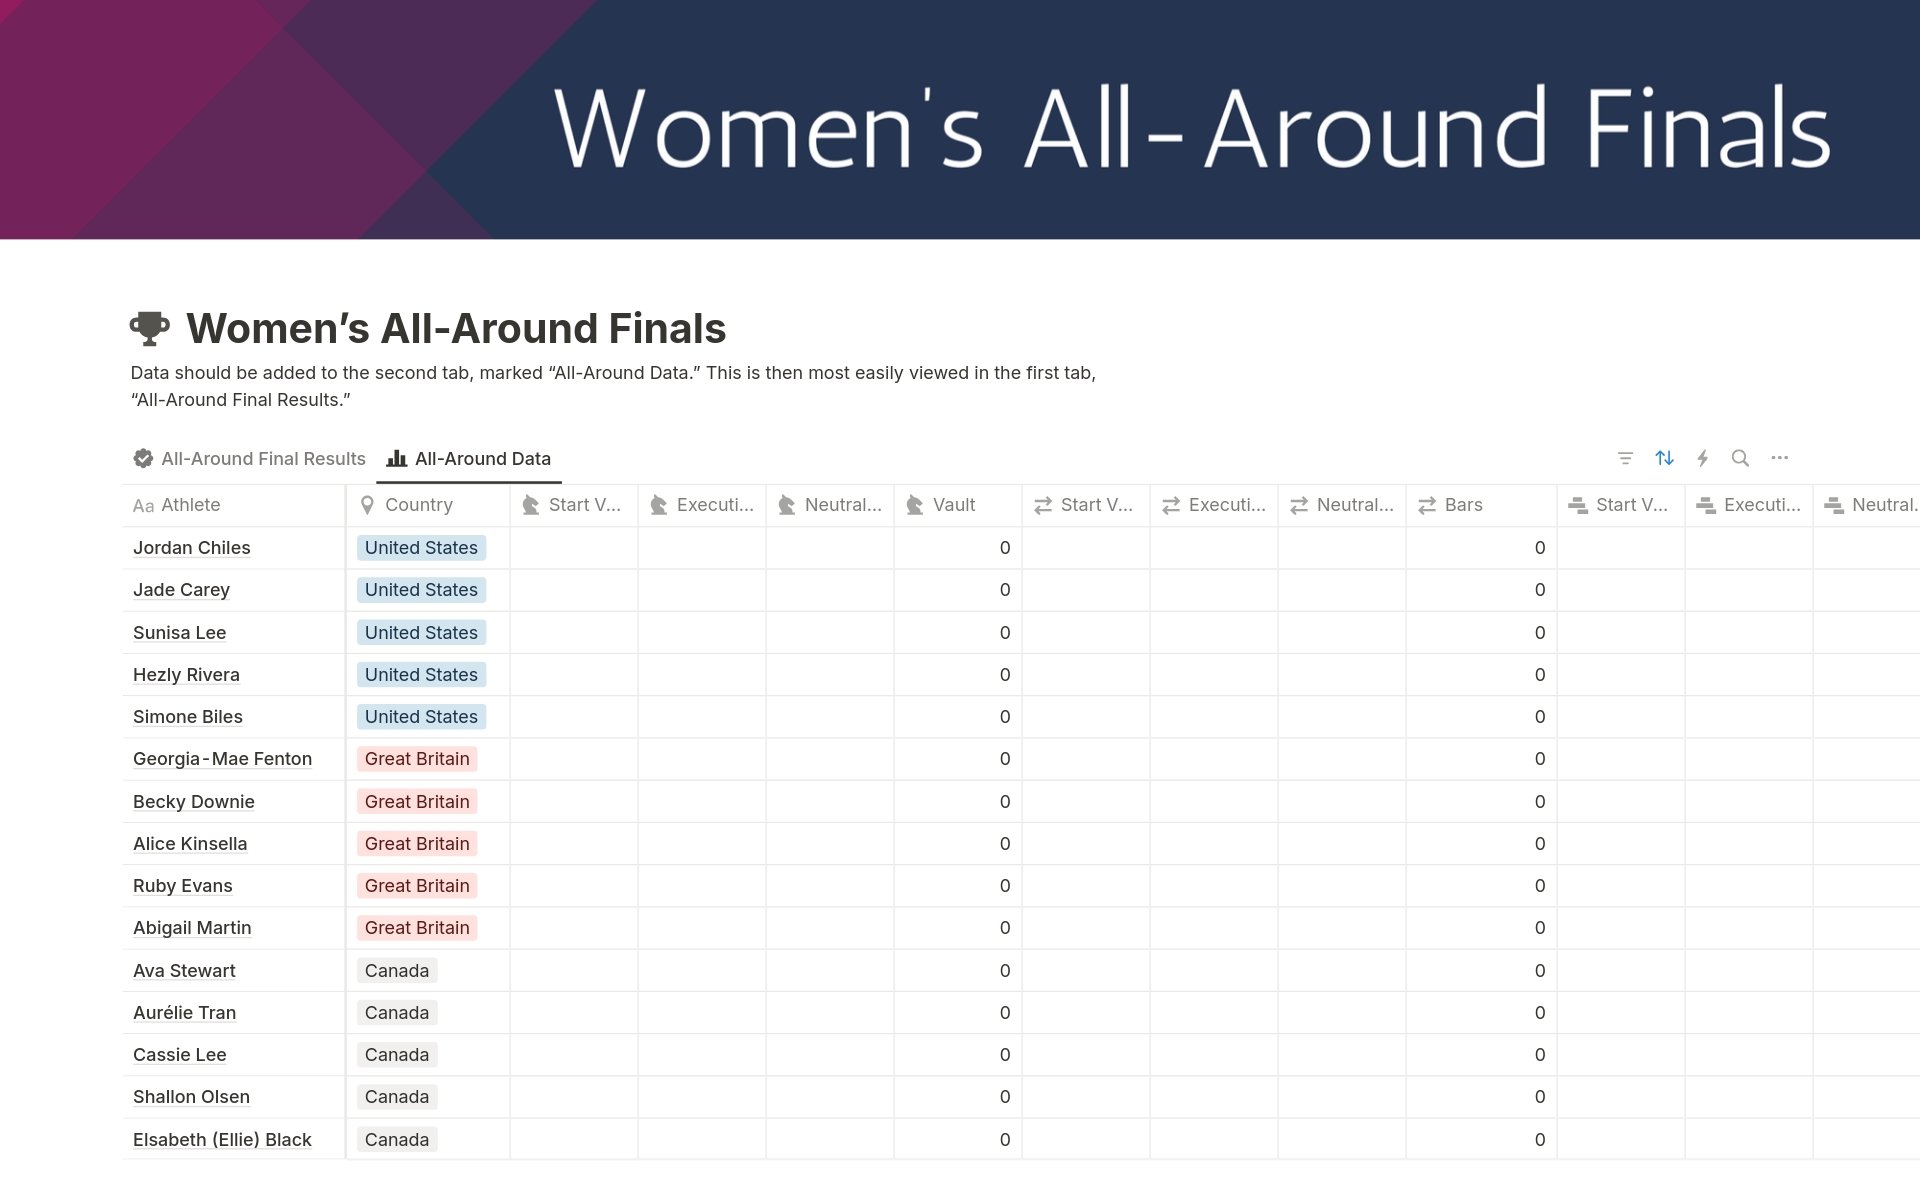 Track the women's artistic gymnastics events with this in-depth, free template covering every event. As the Olympics continues, the template will be updated.